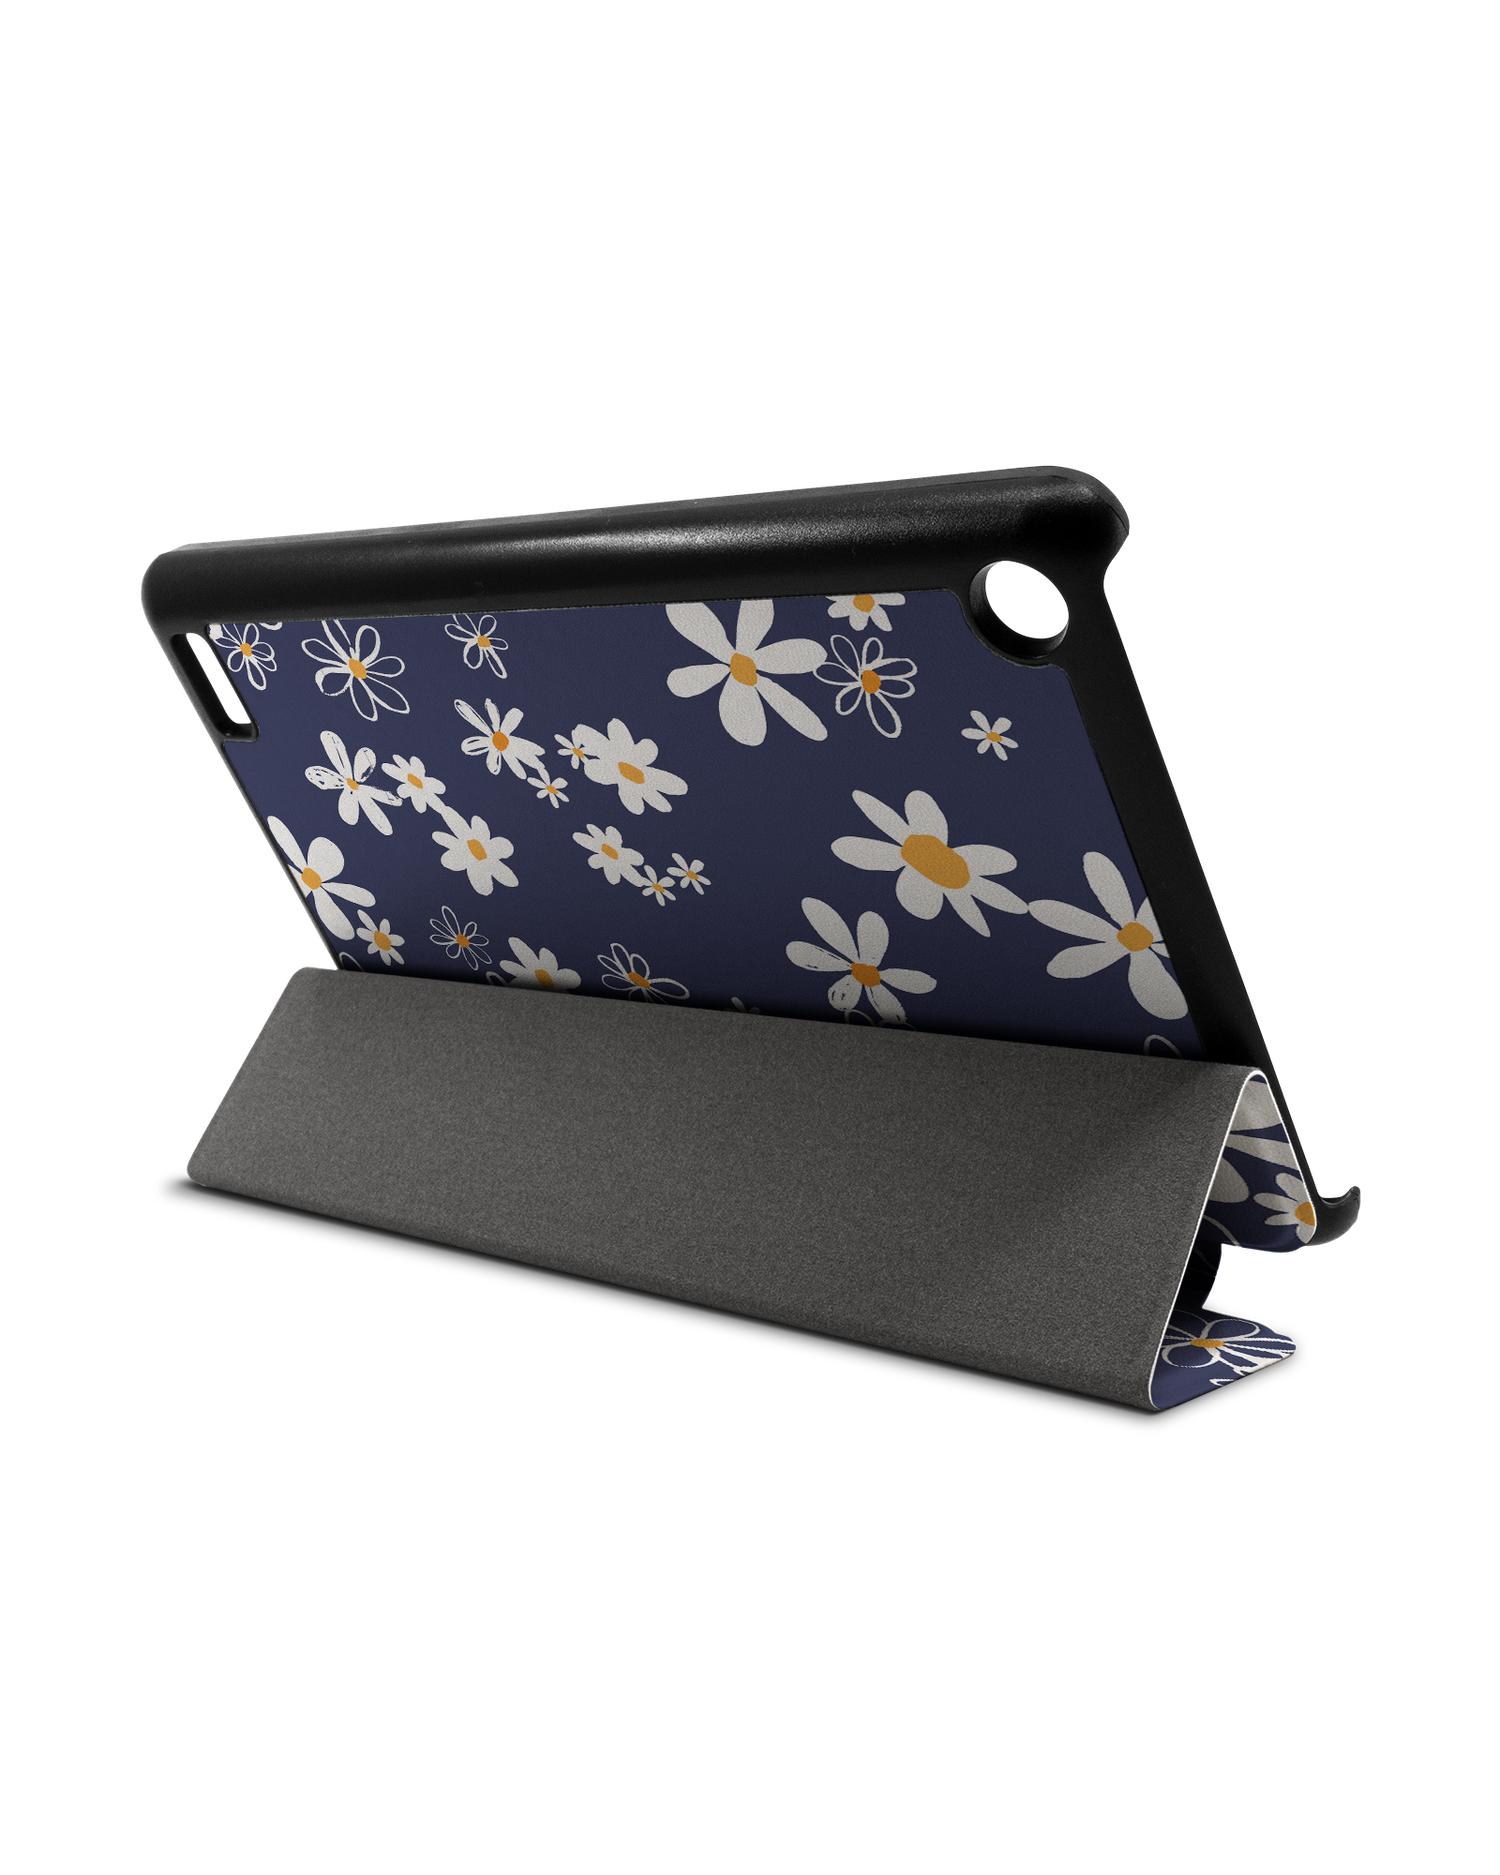 Navy Daisies Tablet Smart Case for Amazon Fire 7: Used as Stand